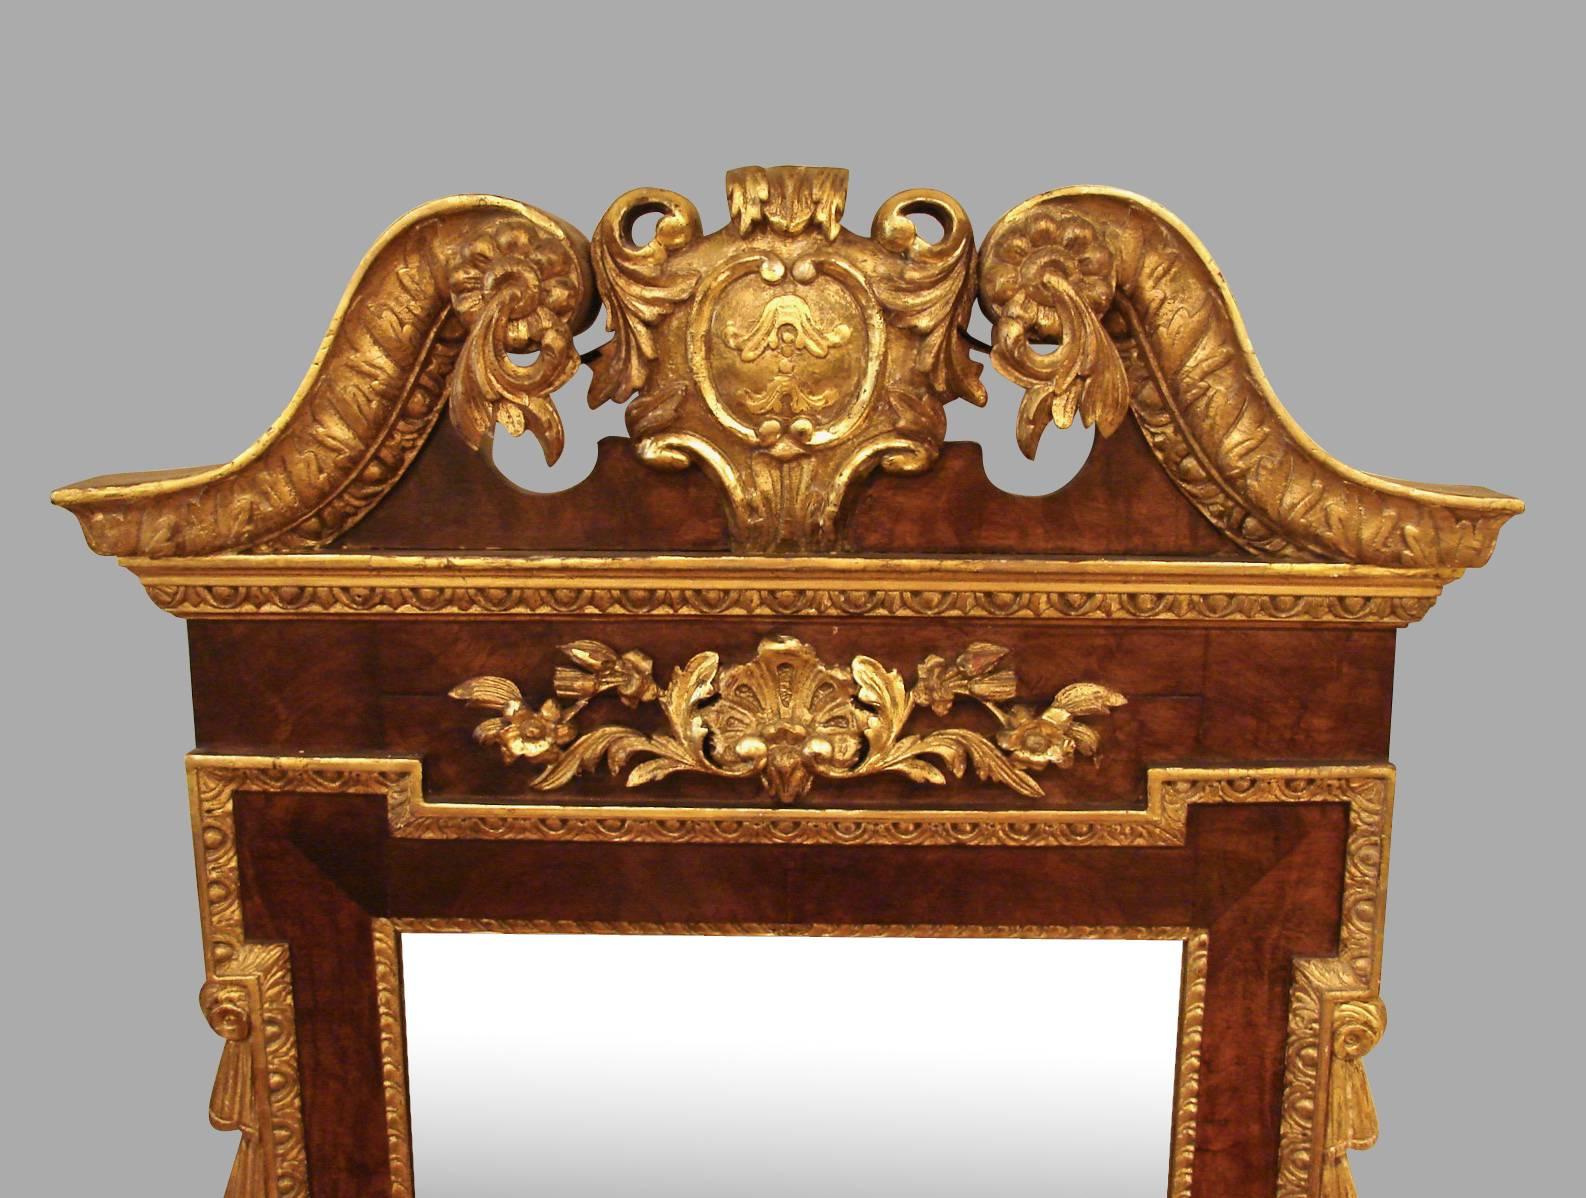 A George III walnut parcel-gilt wall mirror, the gilded swan neck pediments each terminating in a flower rosette with trailing leaves above a gadrooned edge over a carved and gilt central foliate decoration, the mirror framed by an inner border of